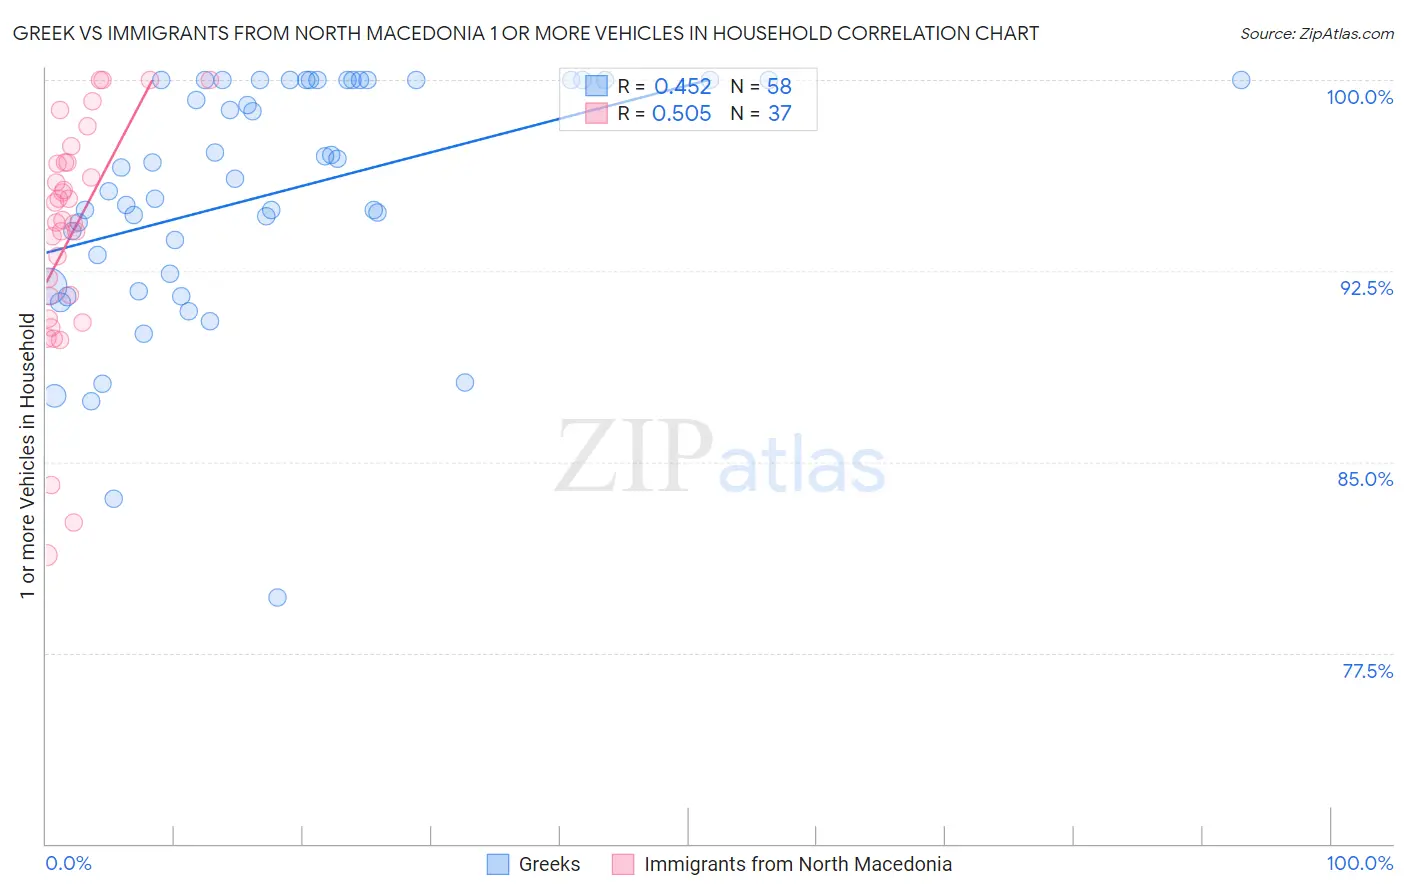 Greek vs Immigrants from North Macedonia 1 or more Vehicles in Household